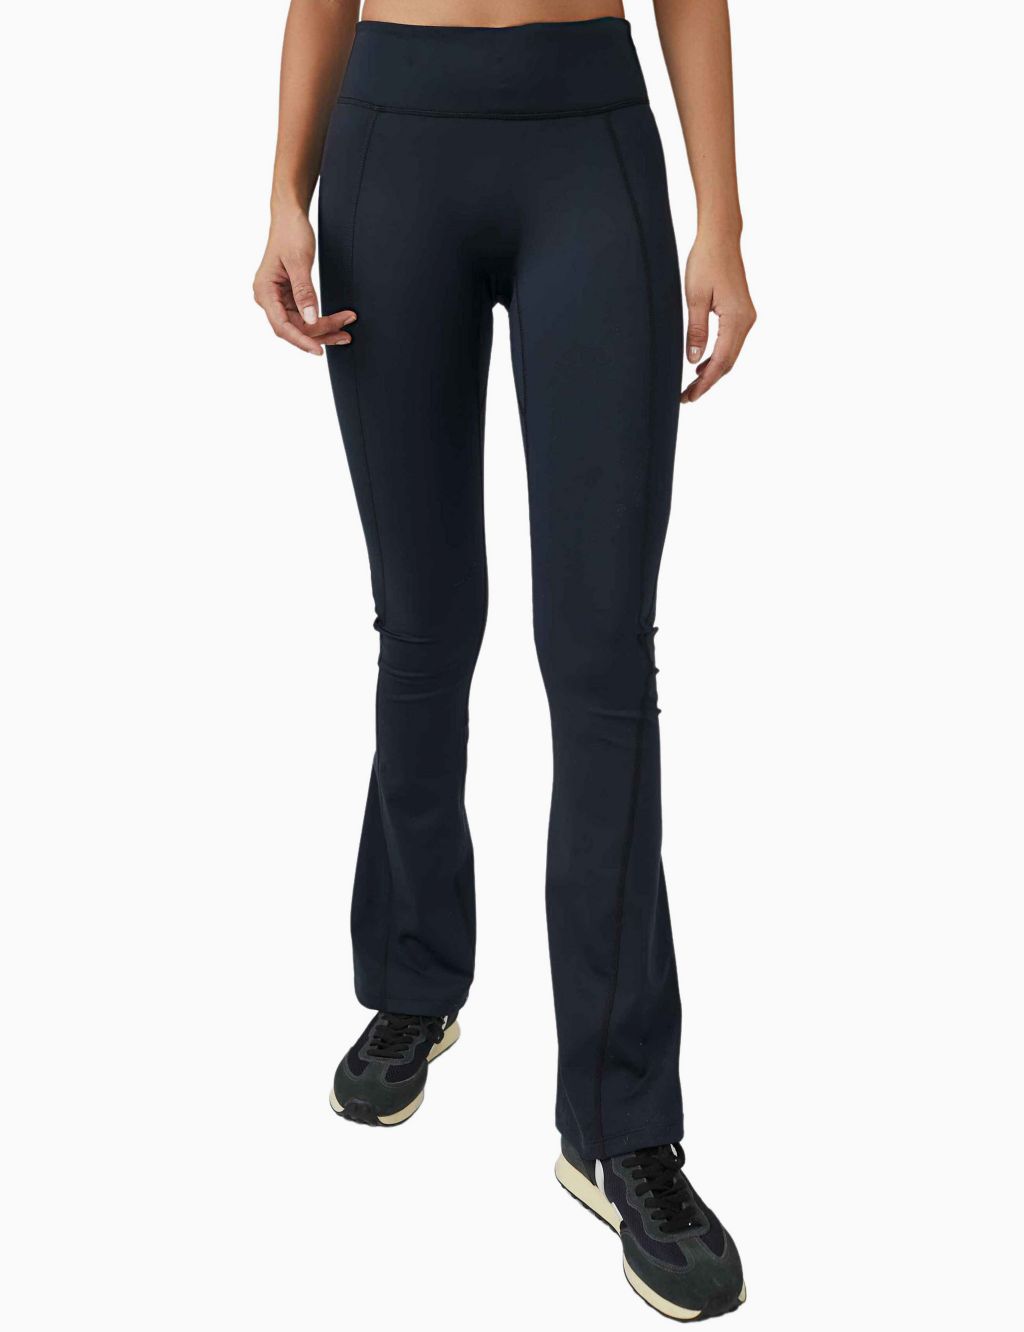 Resilience High Waisted Slim Flared Joggers image 1